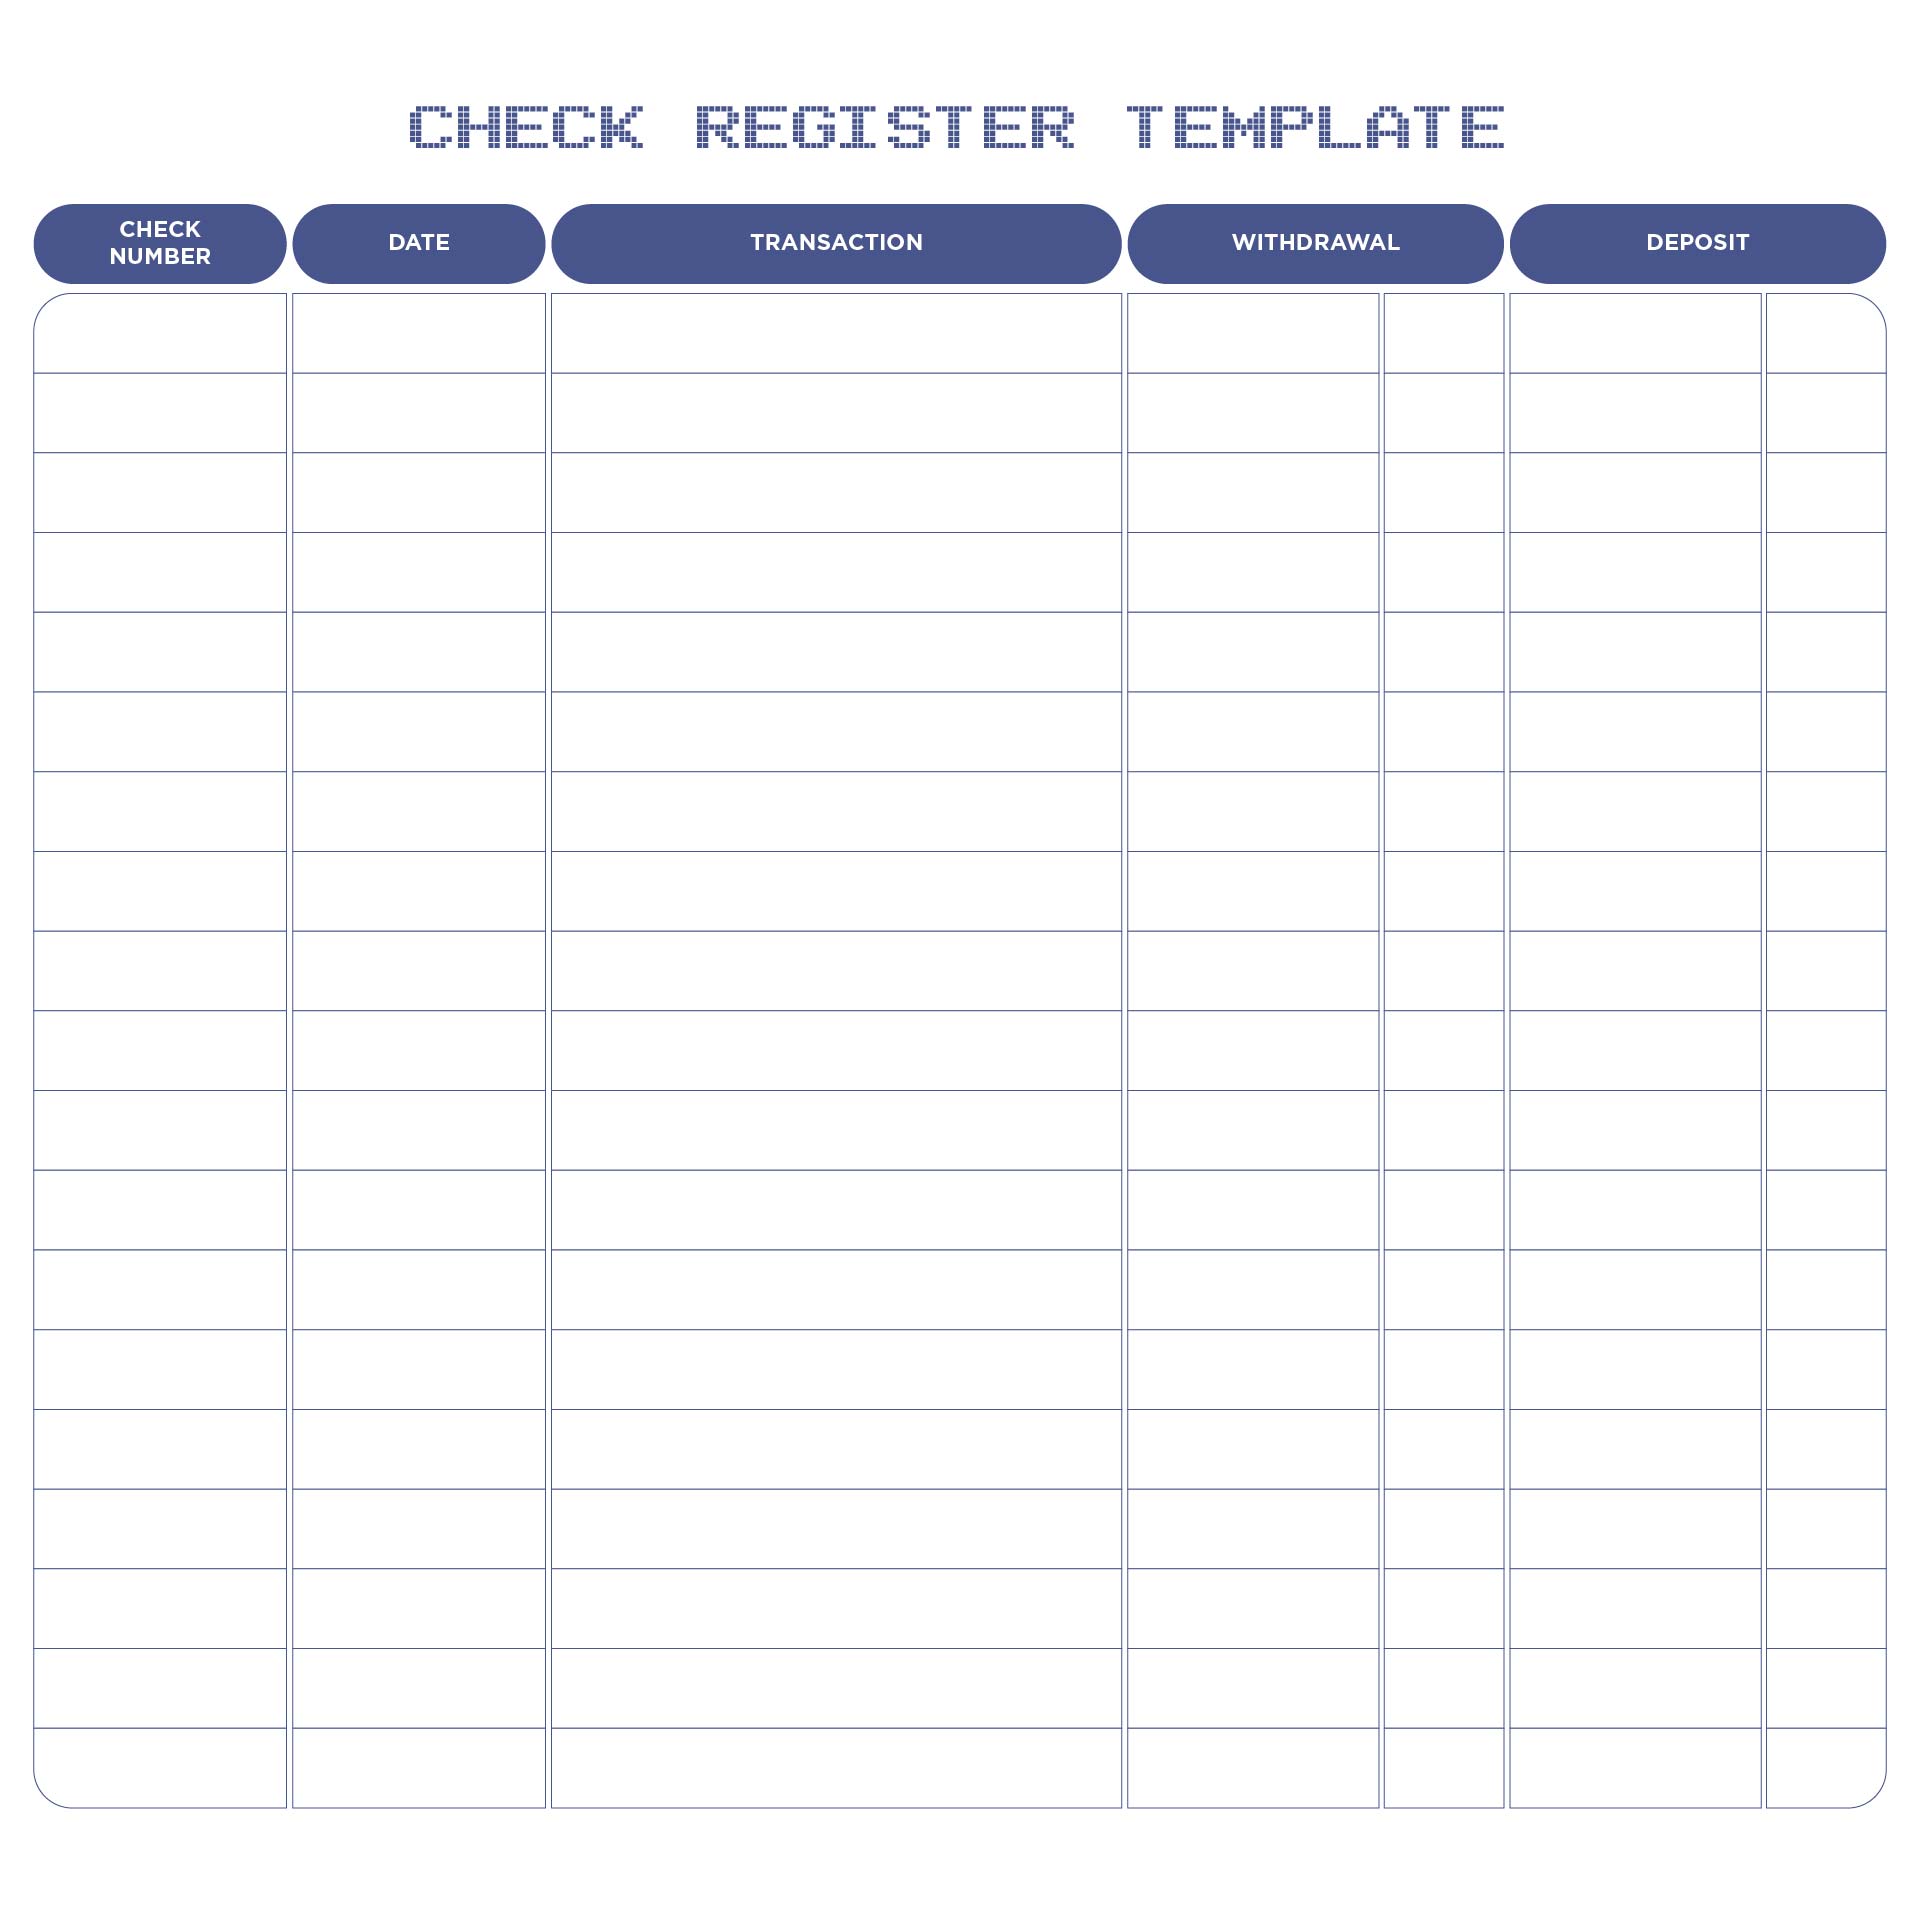 Free Printable Checkbook Register Forms Printable Forms Free Online